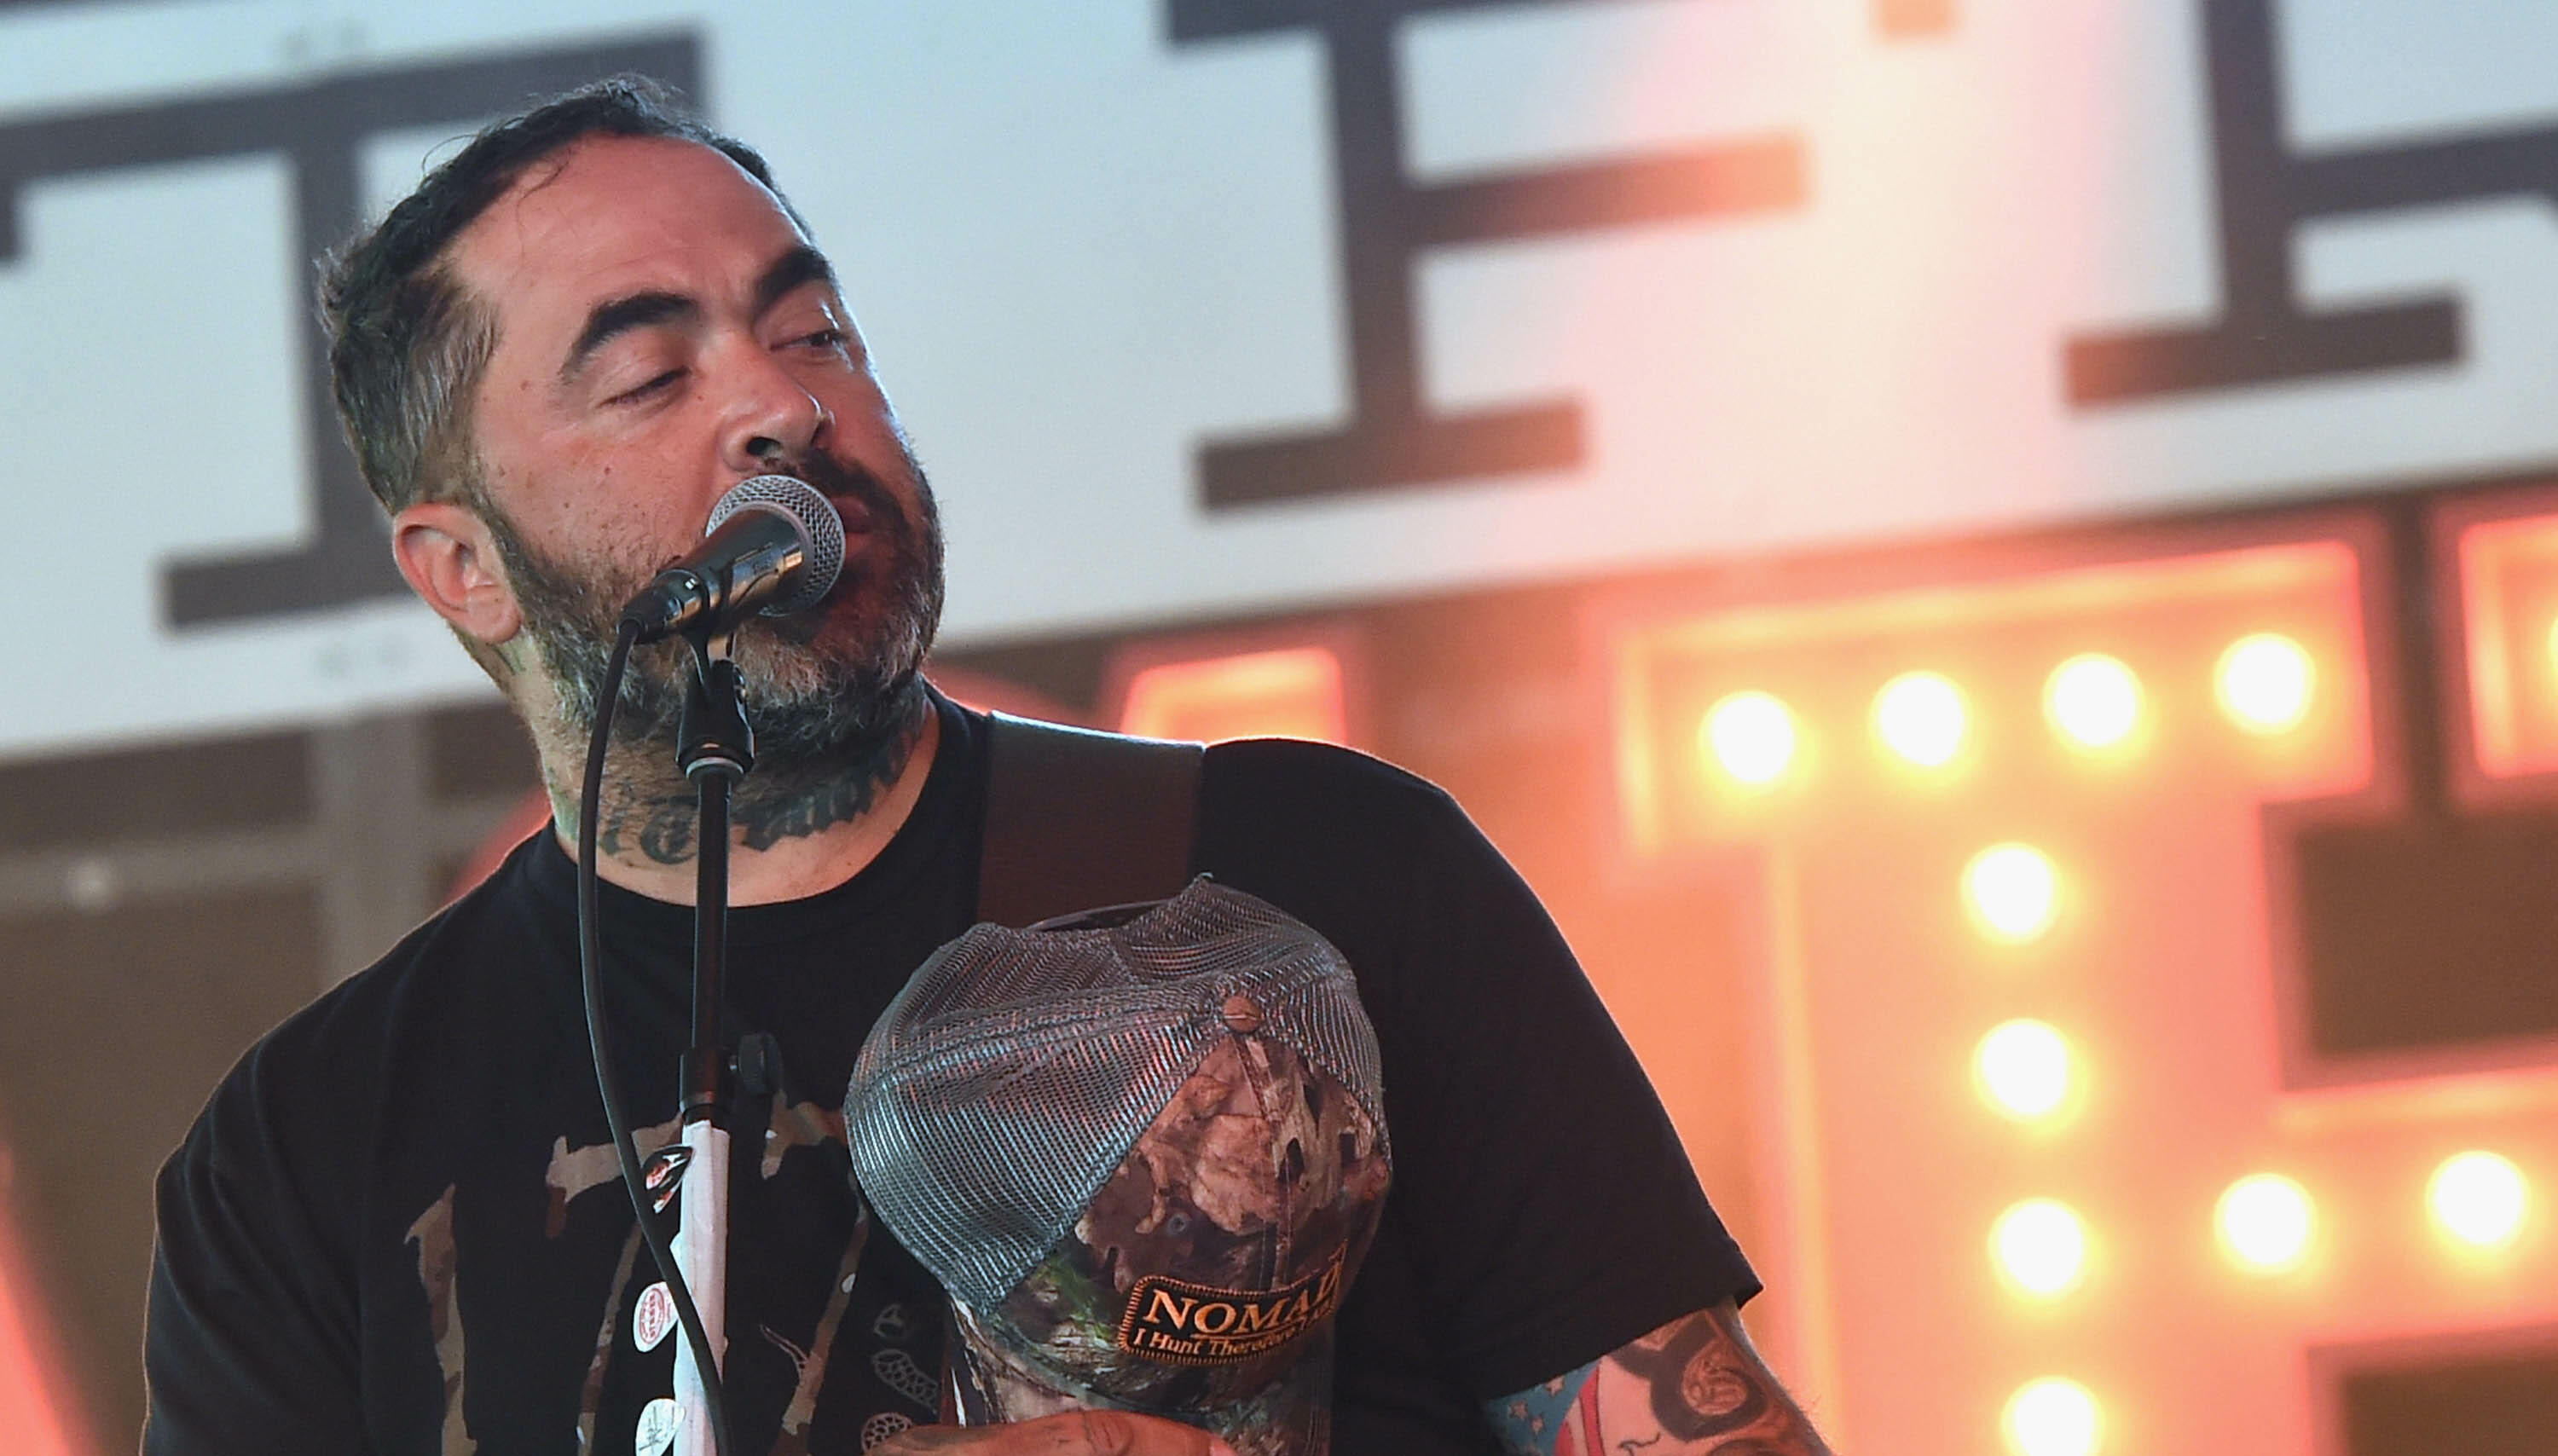 Aaron Lewis Ends Another Concert Early "Shut the Fk Up or I'm Done